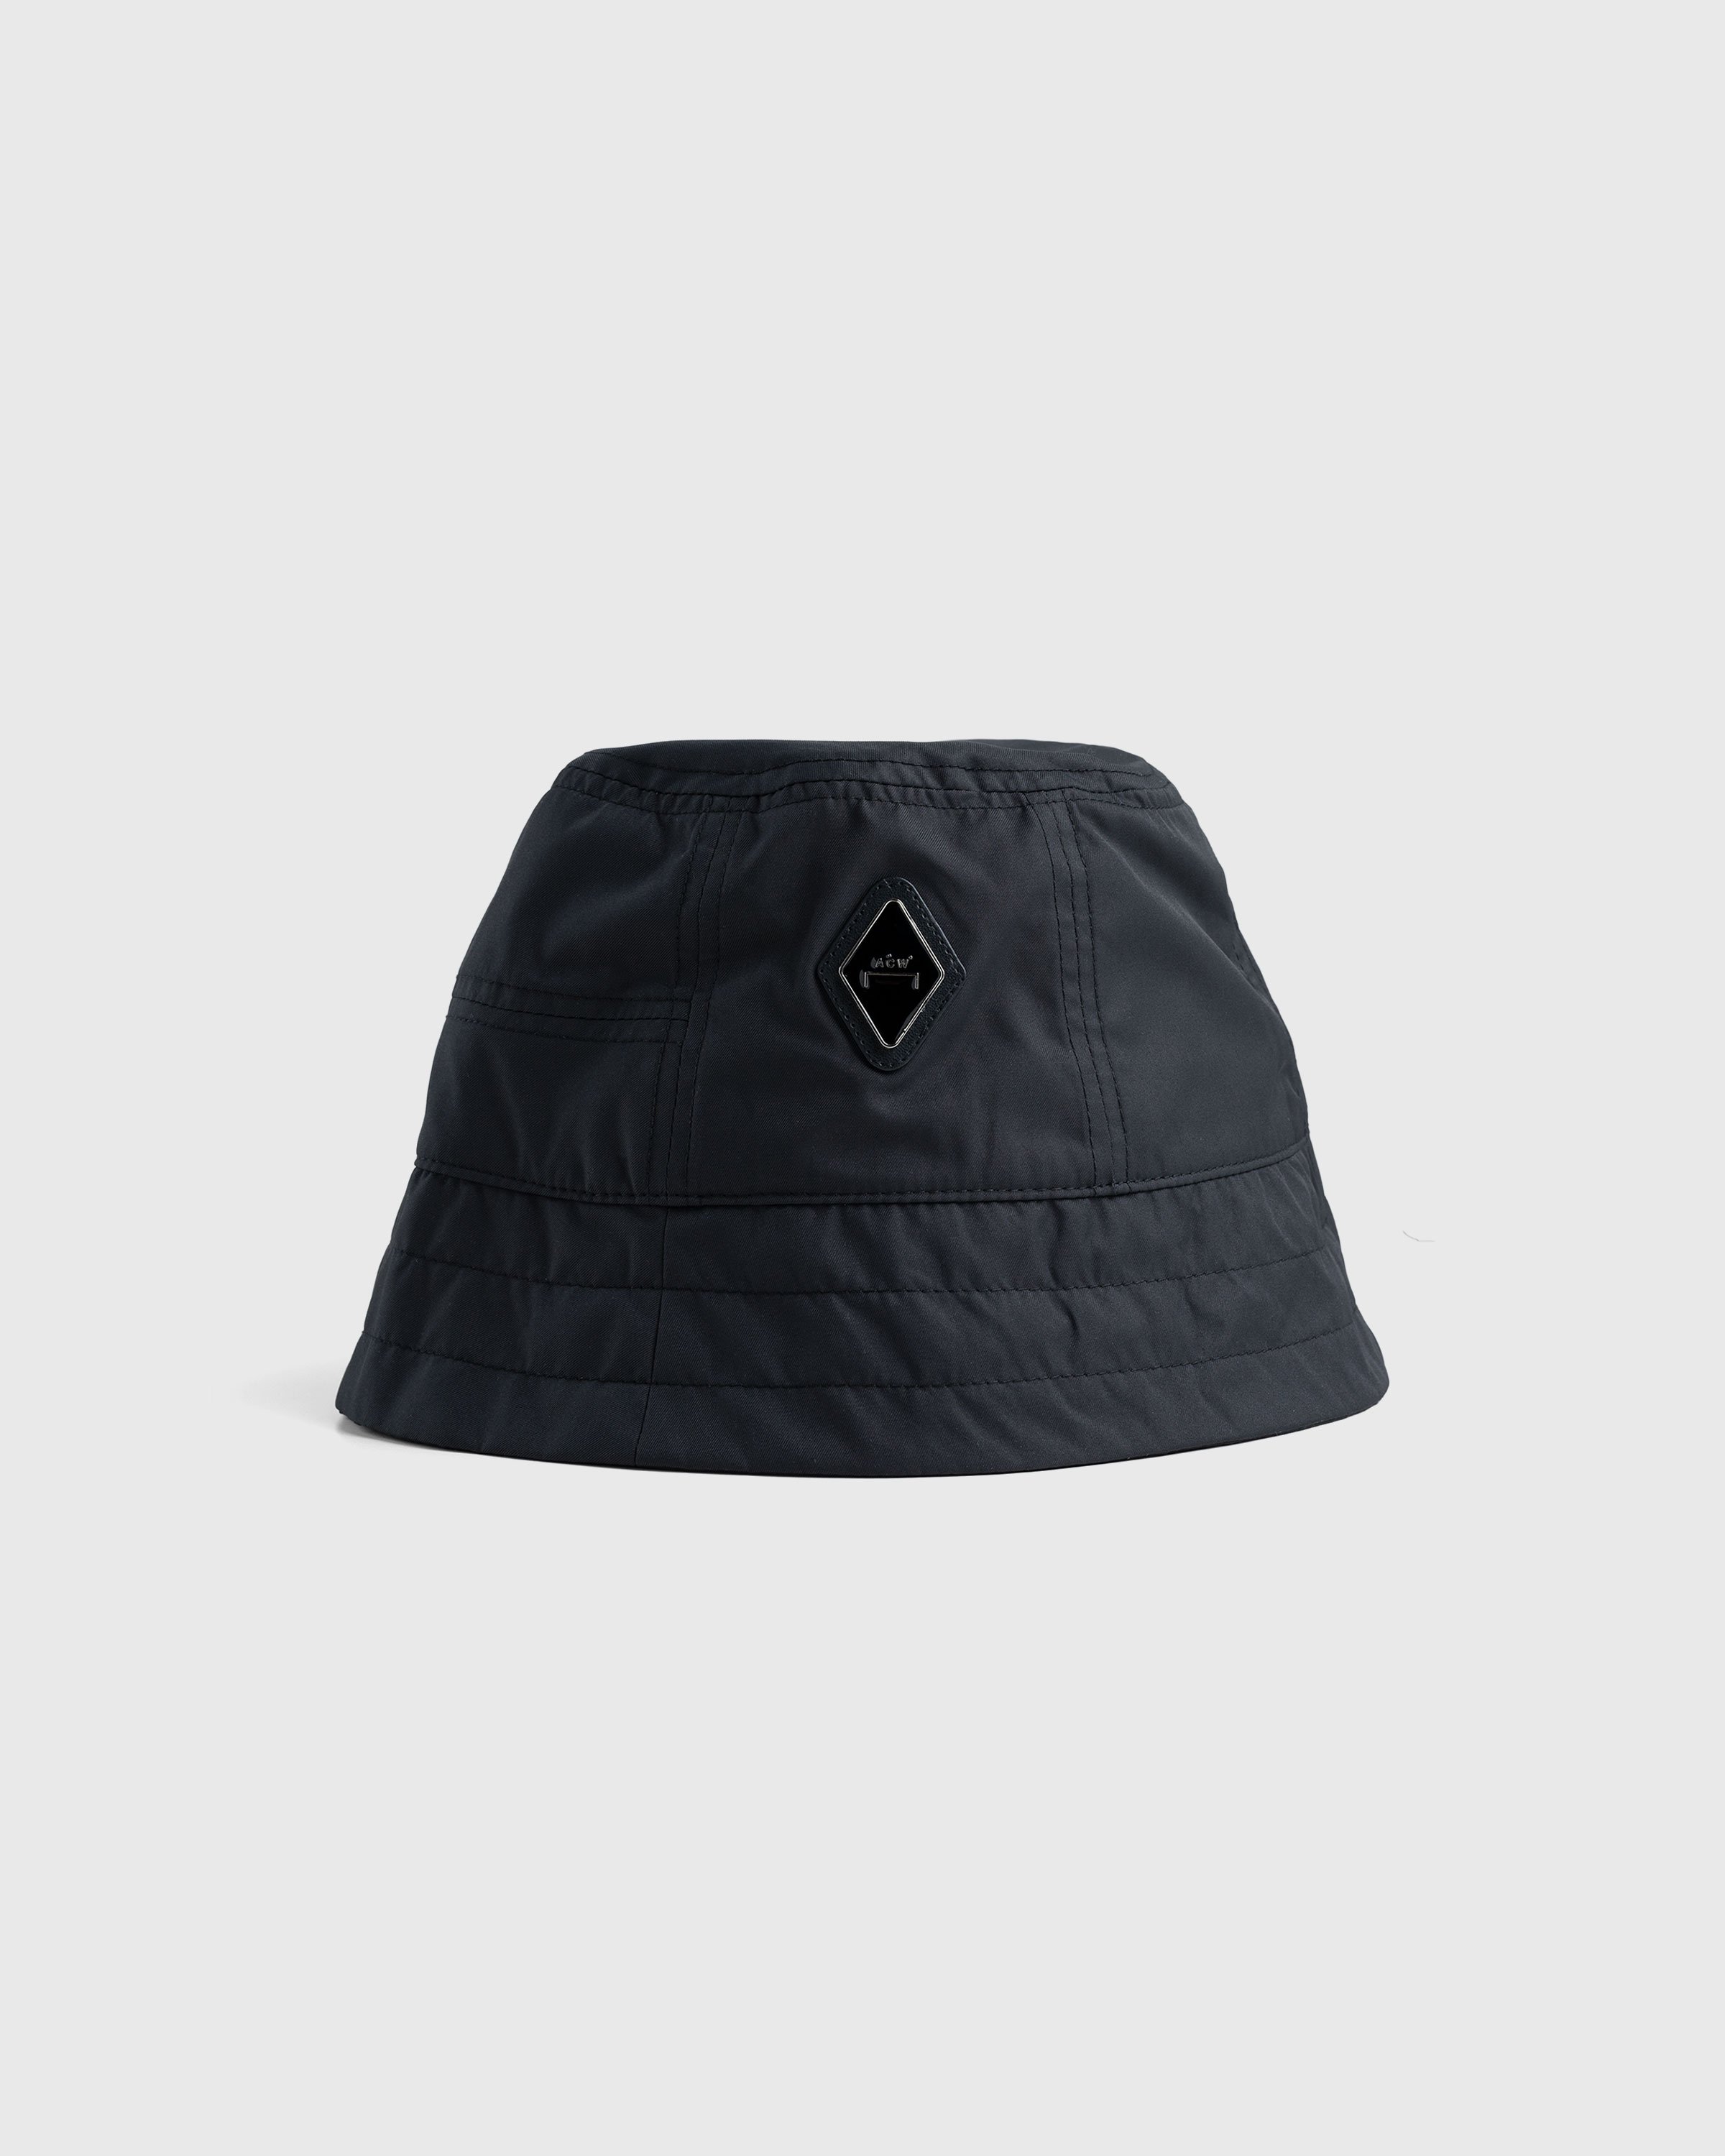 A-Cold-Wall* - Essential Bucket Hat Black - Accessories - Black - Image 1